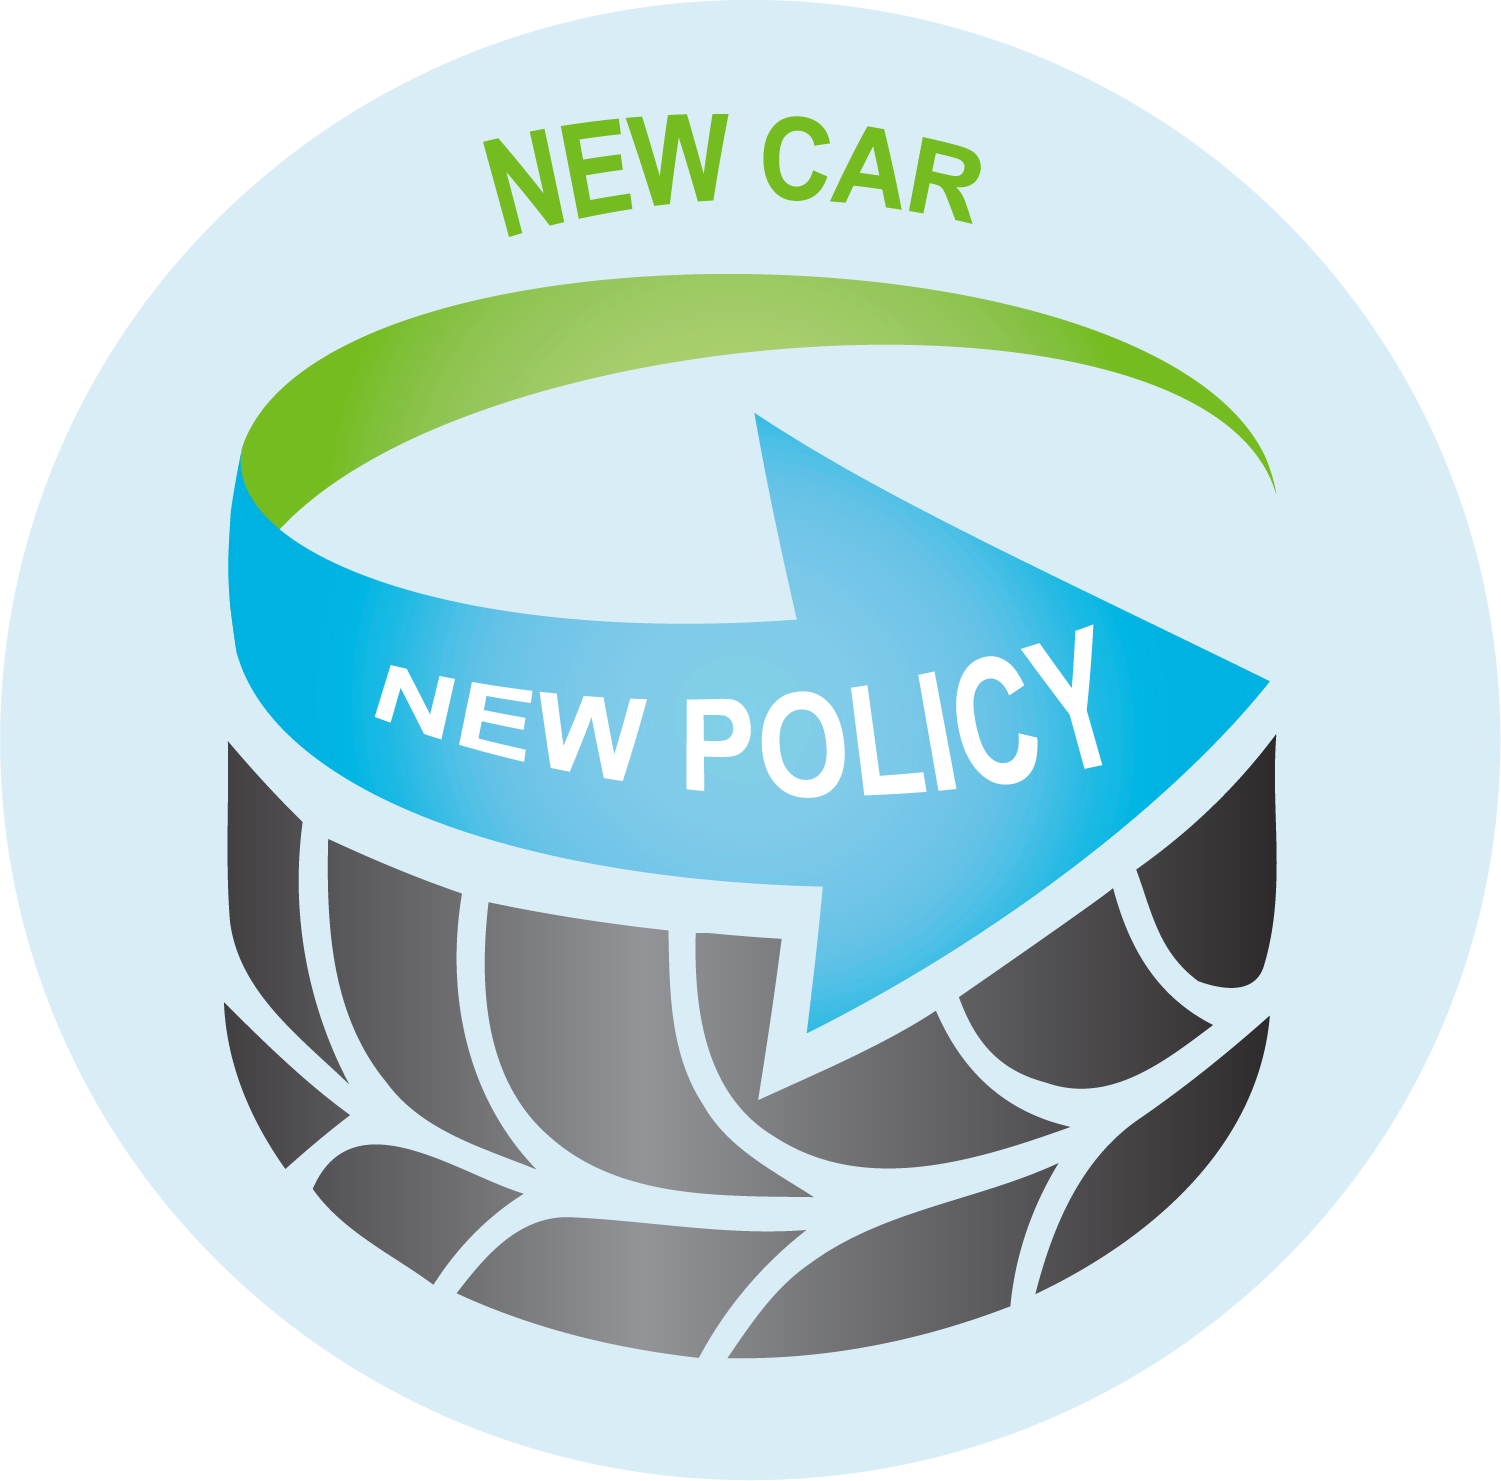 Our new-for-old promise: New car, new policy!